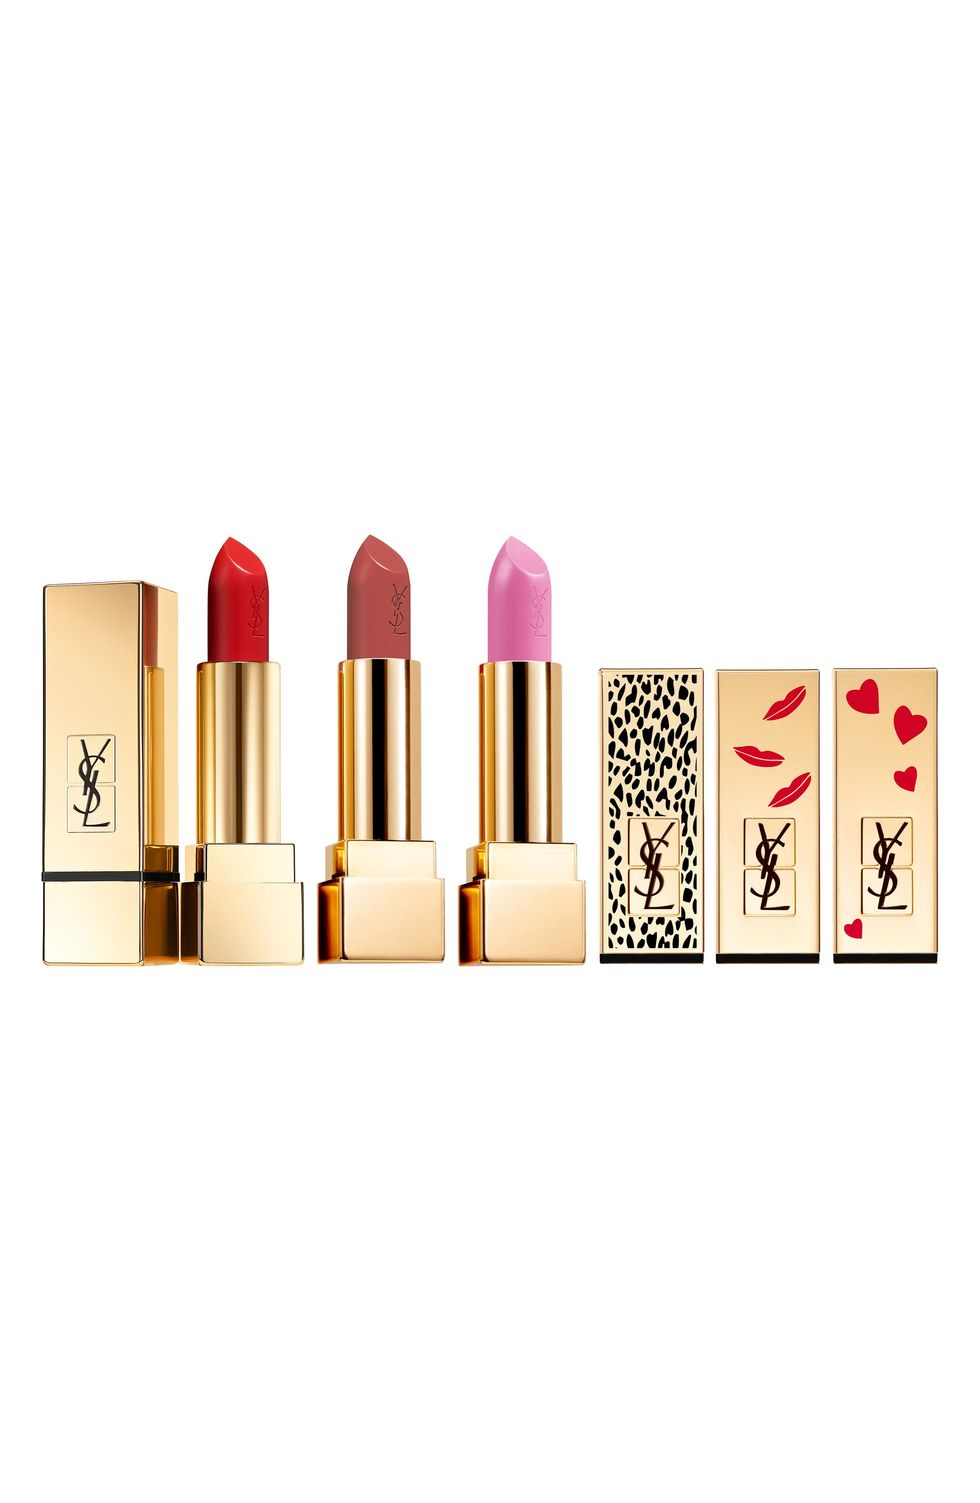 Yves Saint Laurent Full Size Rouge Pur Couture Satin Lipstick Set USD $129 Value at Nordstrom